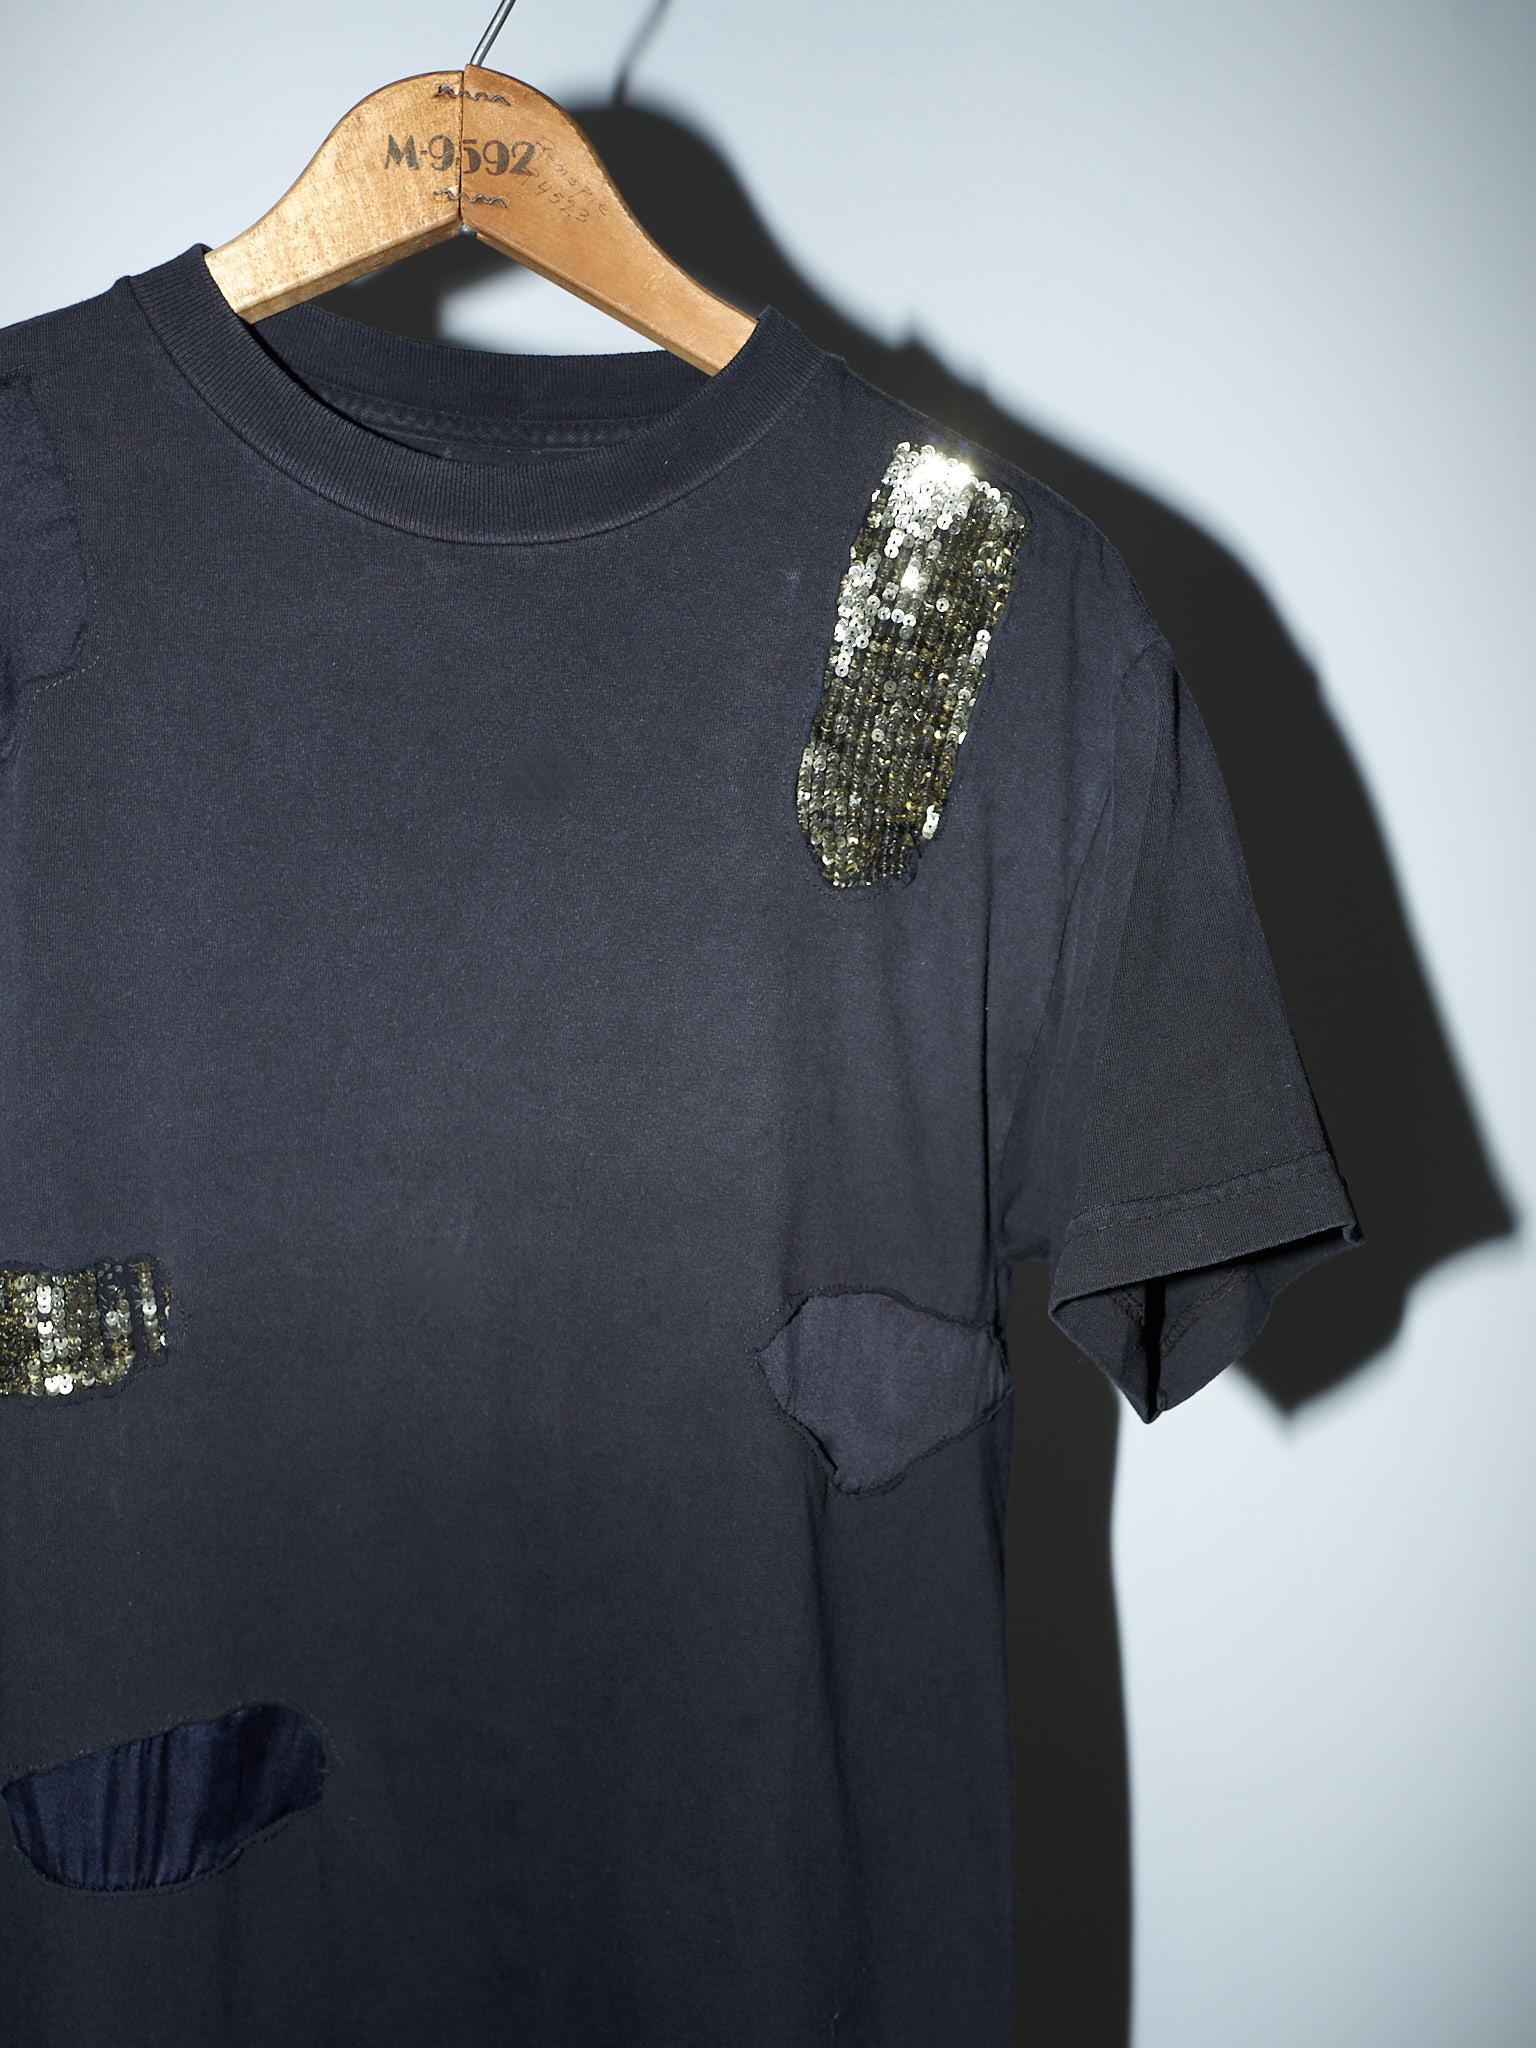 T-Shirt Black Embellished Sequin Silk Cotton Top J Dauphin In New Condition In Los Angeles, CA